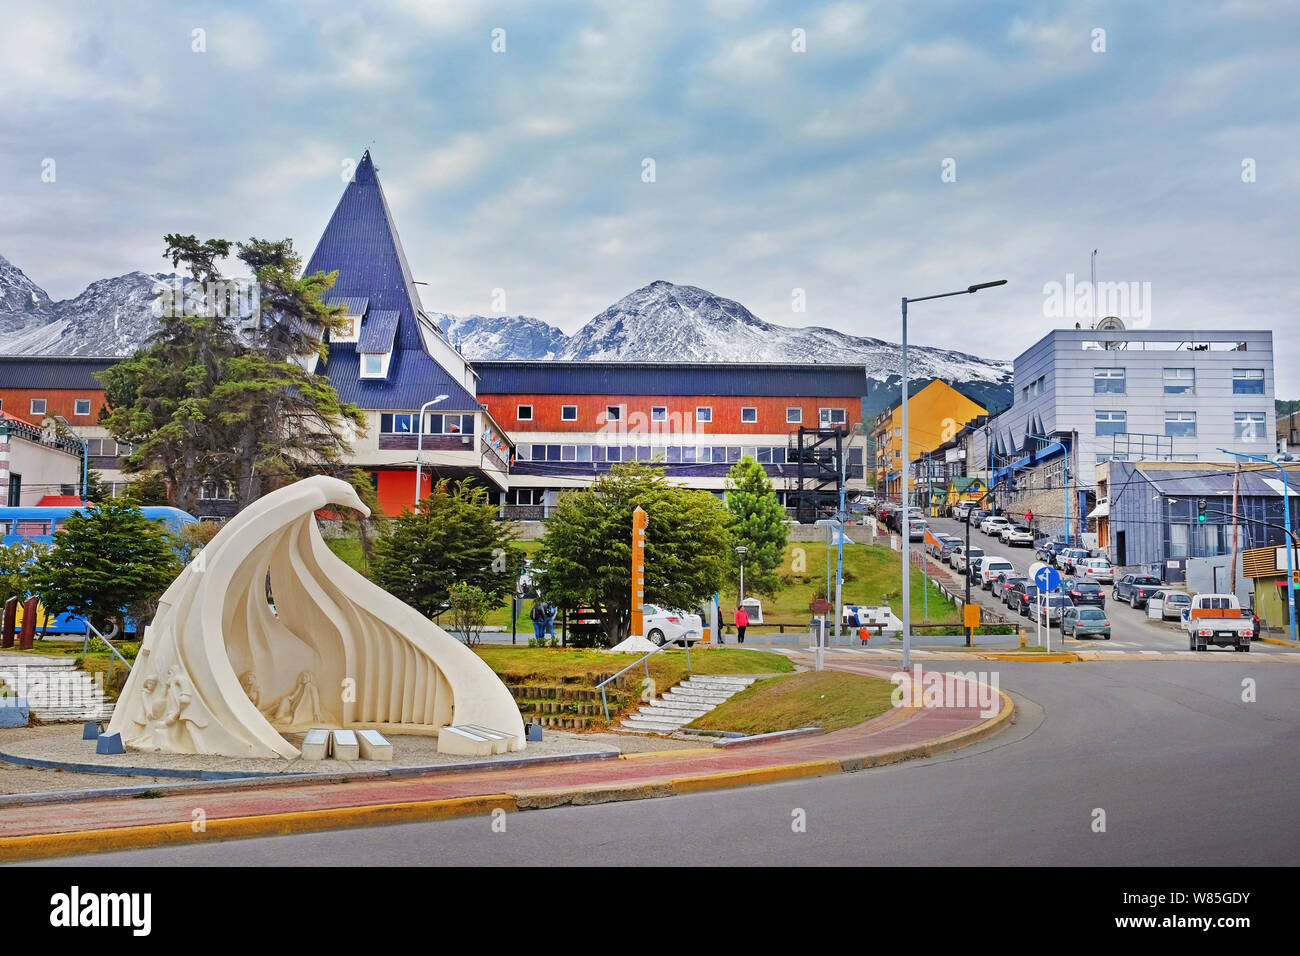 Urban landscape of a monument and people walking on the streets near  colorful buildings in the city center of Ushuaia, in Tierra del Fuego,  Argentina Stock Photo - Alamy